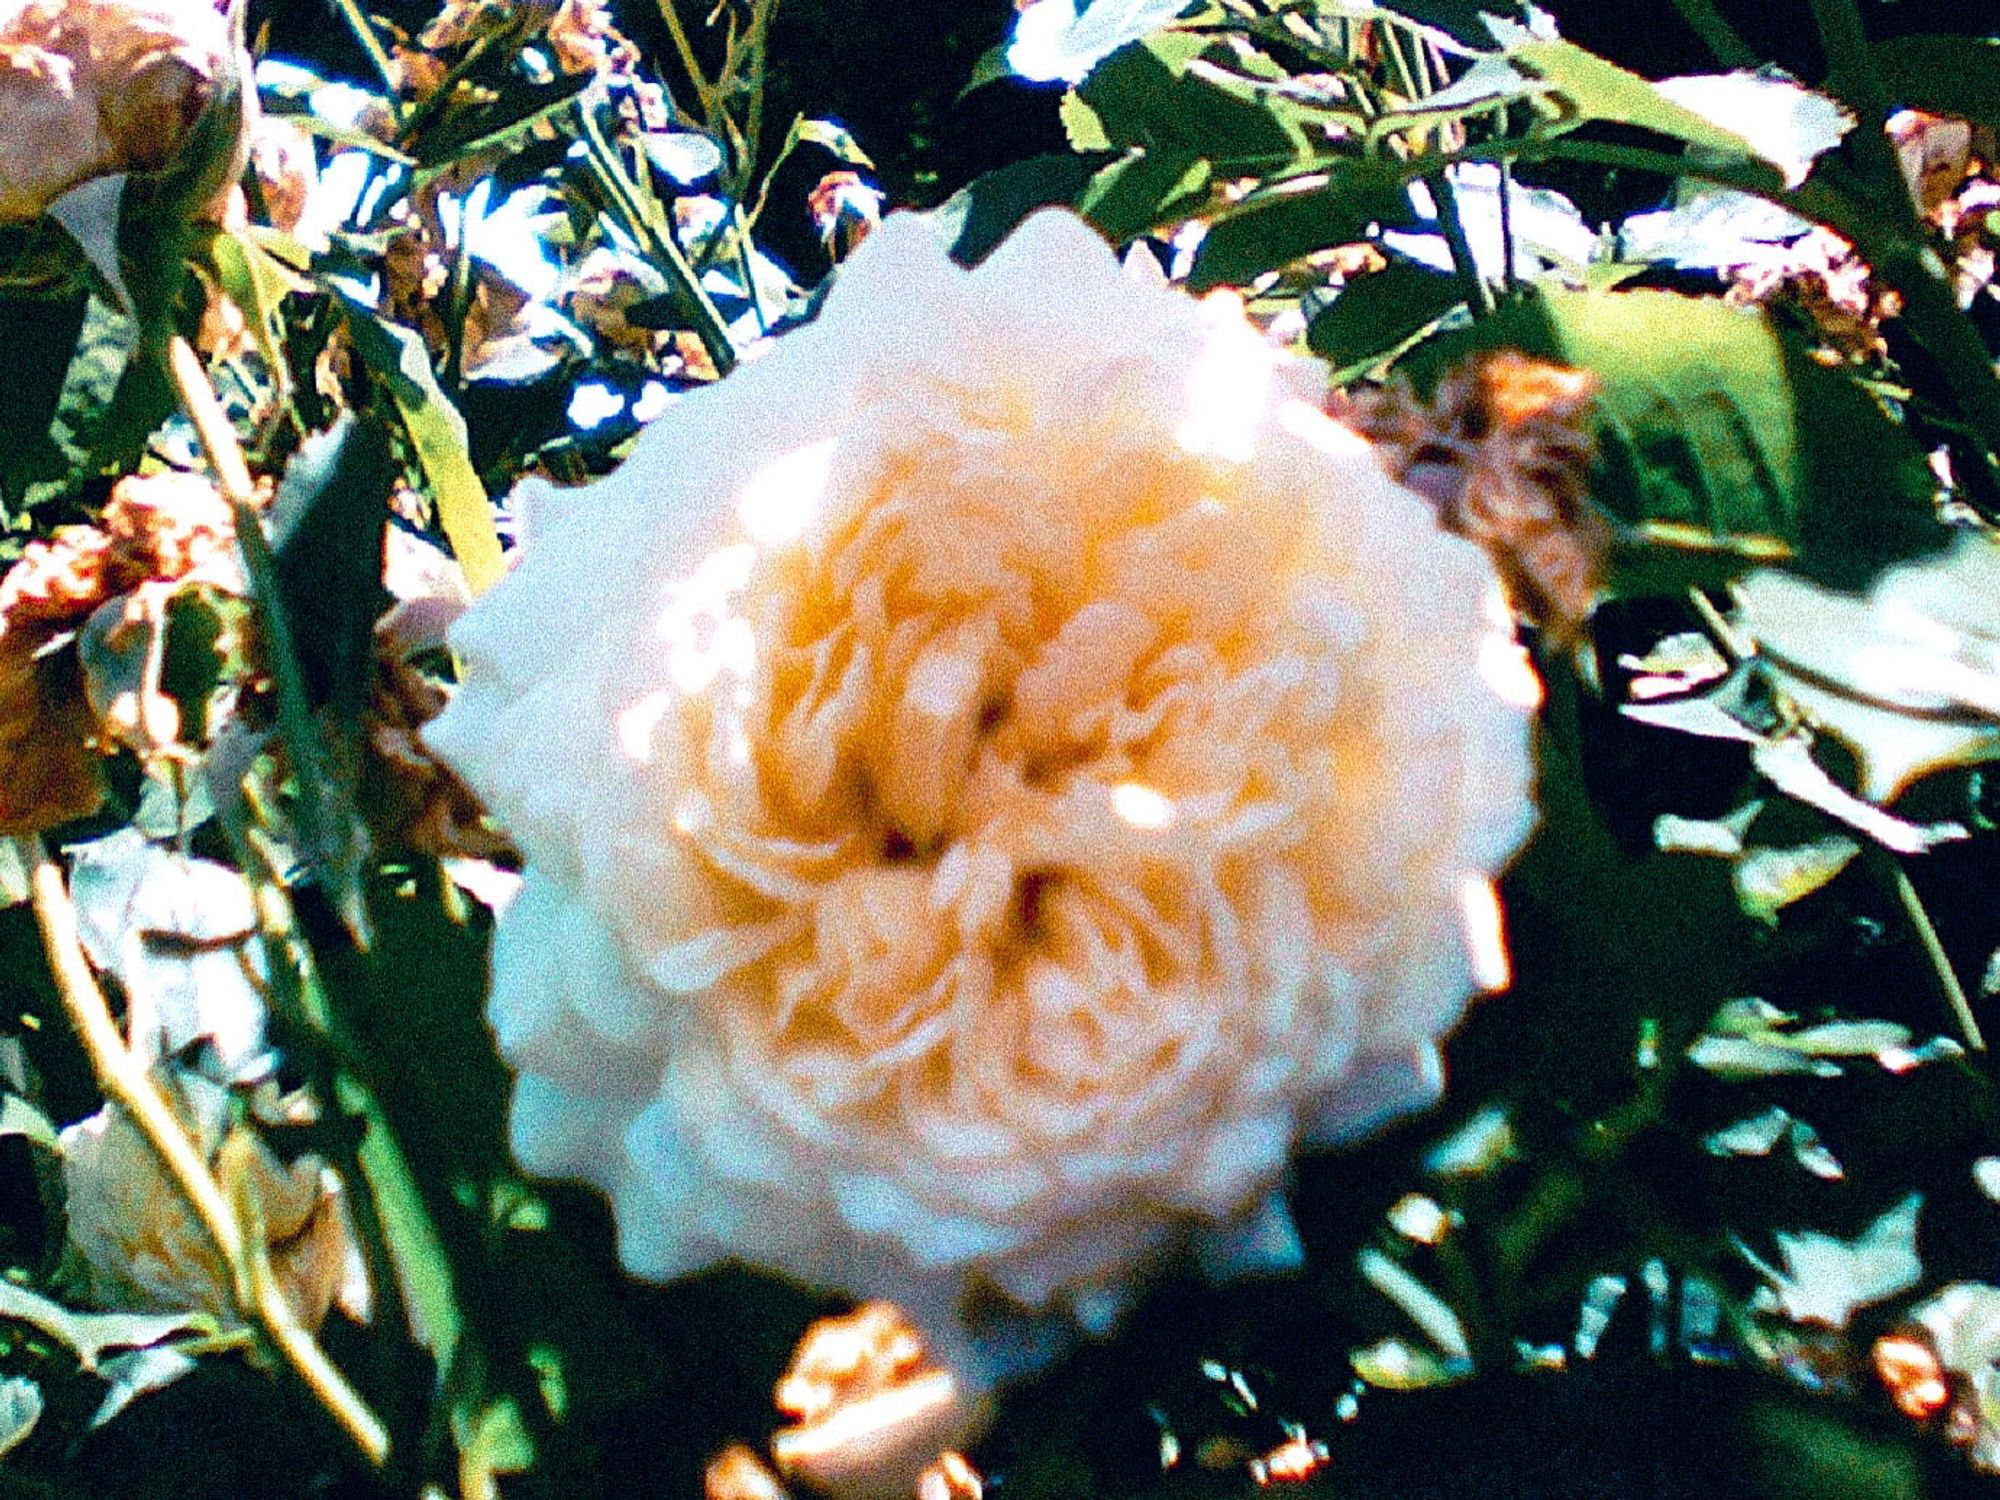 A close-up of a large, blooming white rose surrounded by green leaves and other blossoms.